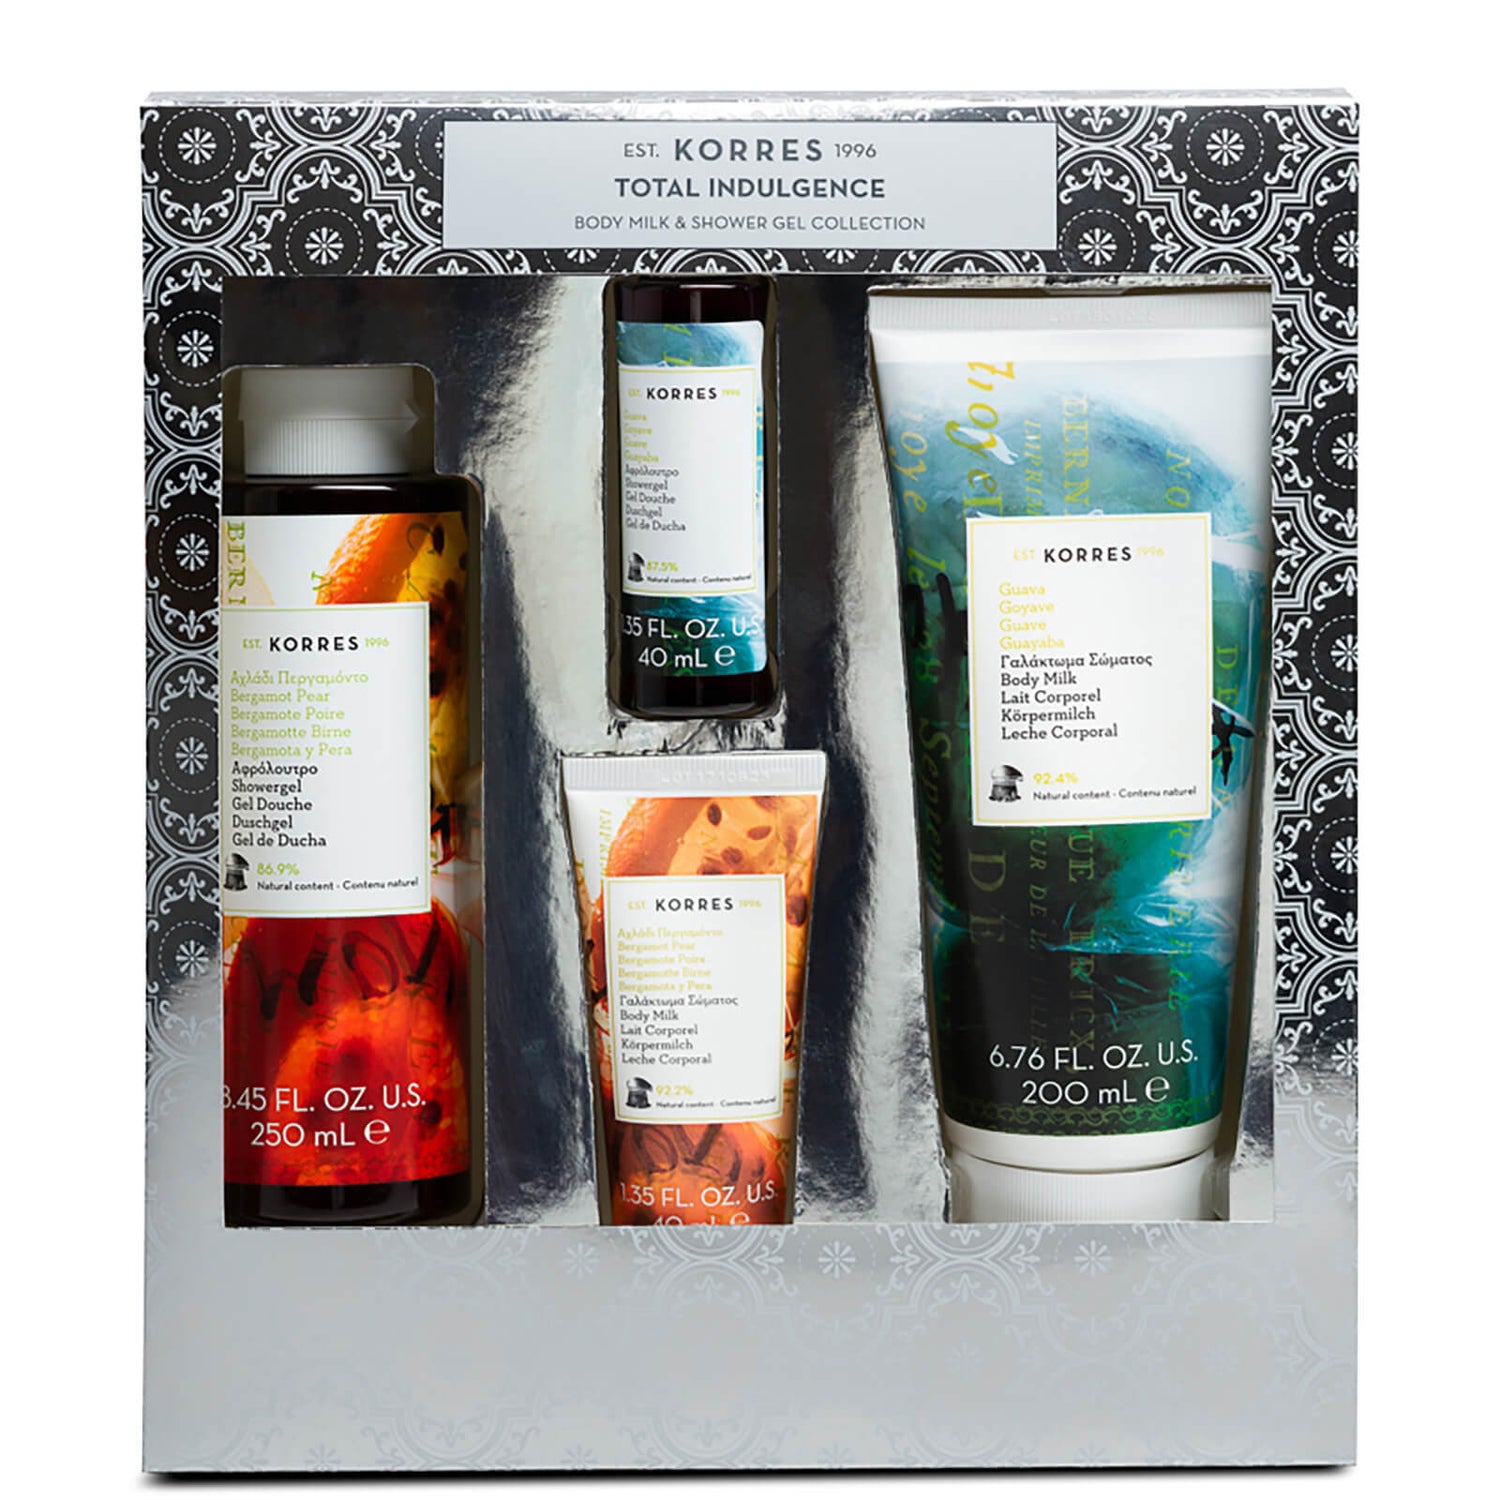 KORRES Total Indulgence Bergamot Pear and Guava Body Milk and Shower Gel Collection (Worth £24.00)